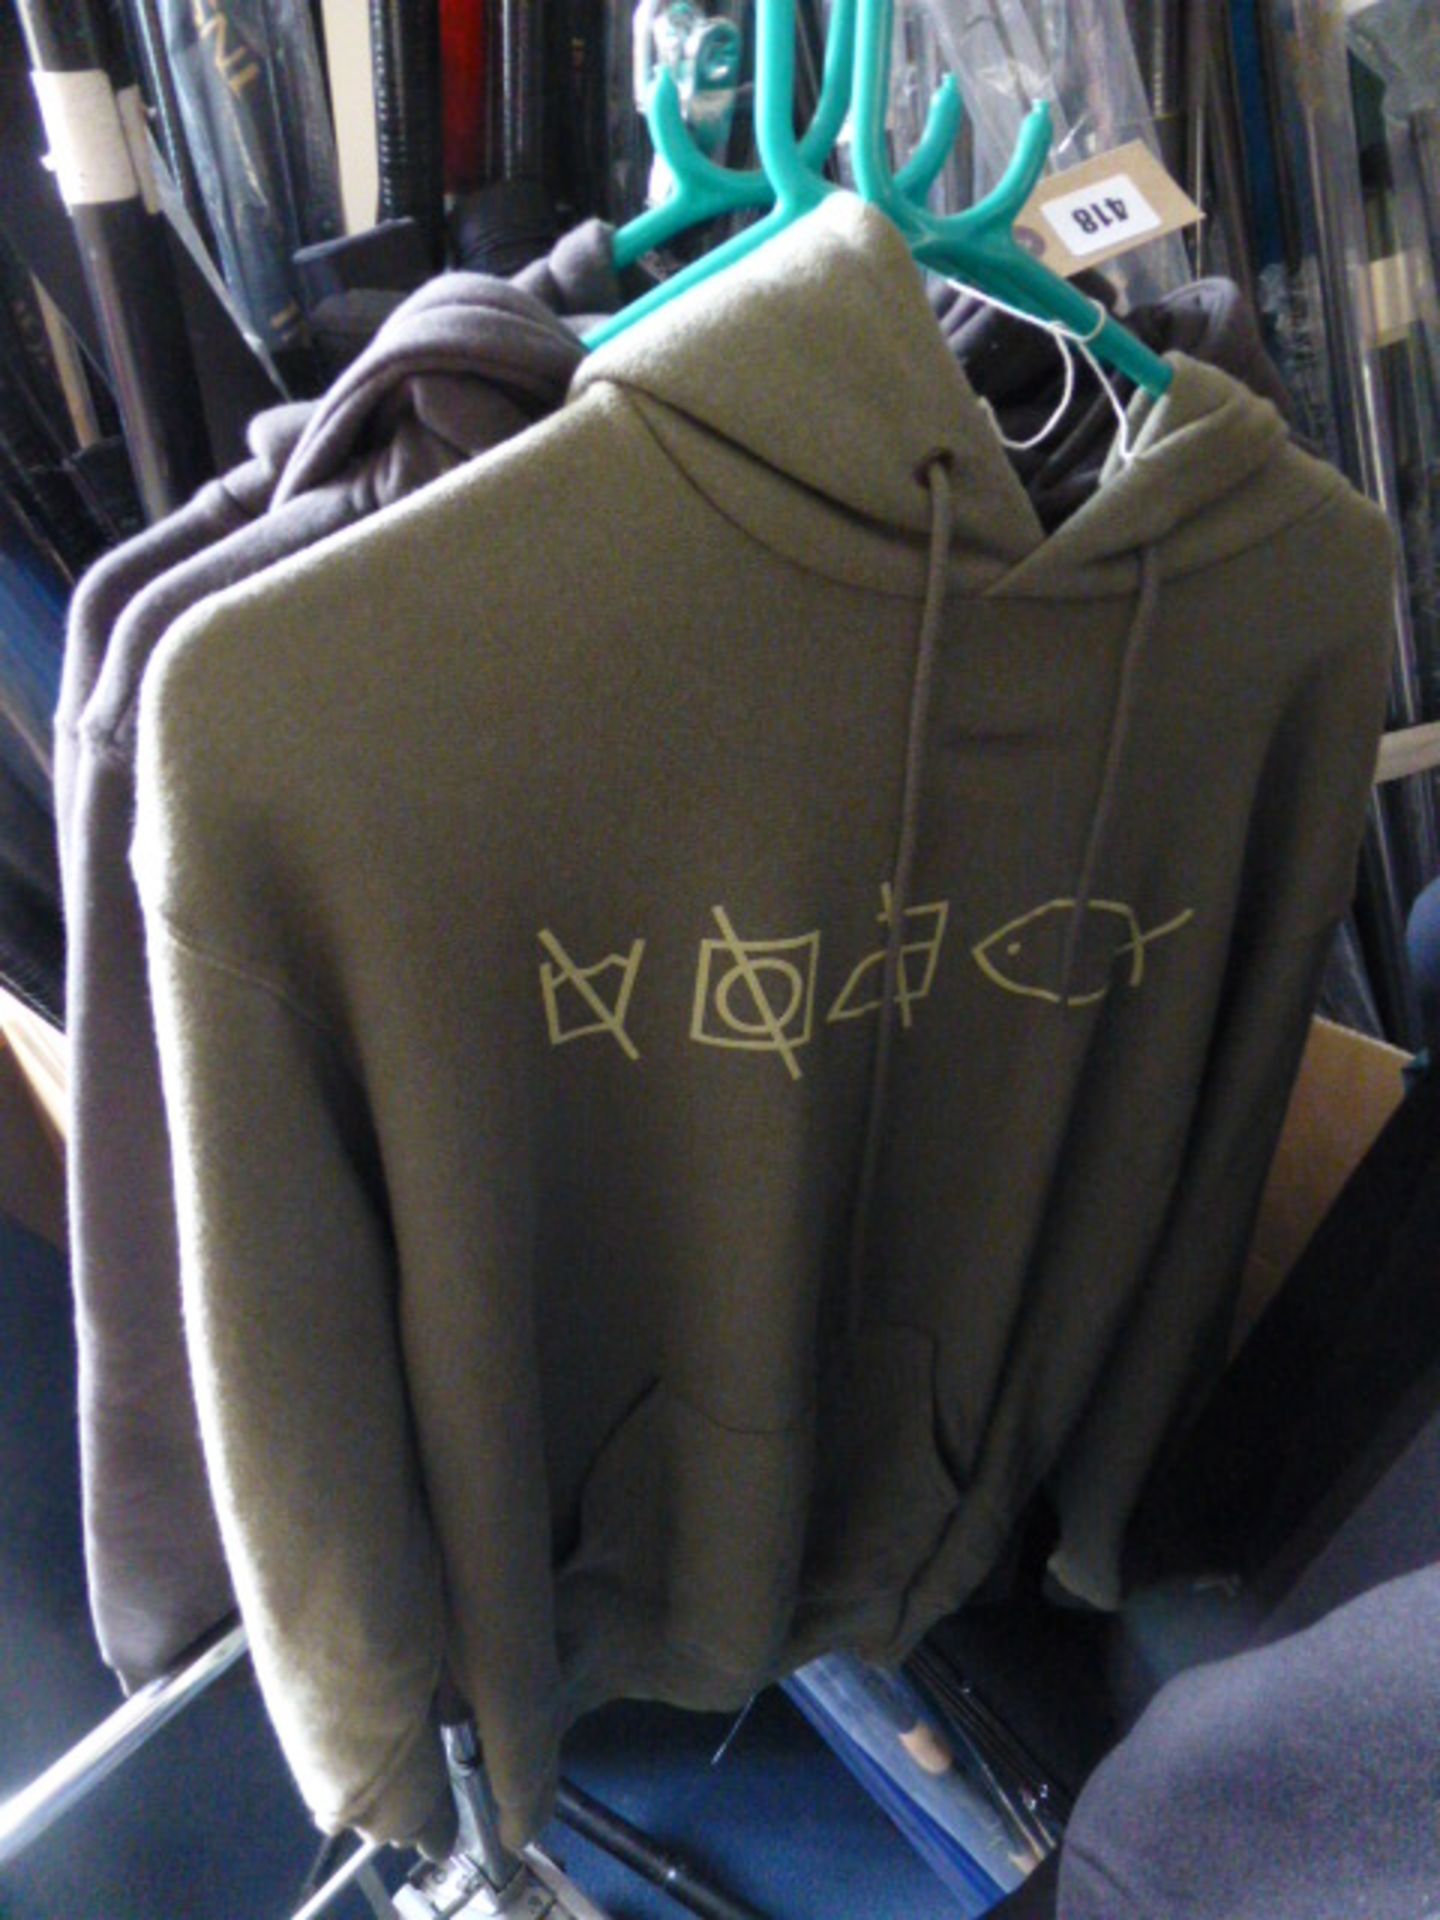 3 Trakker and other hoodies, various sizes